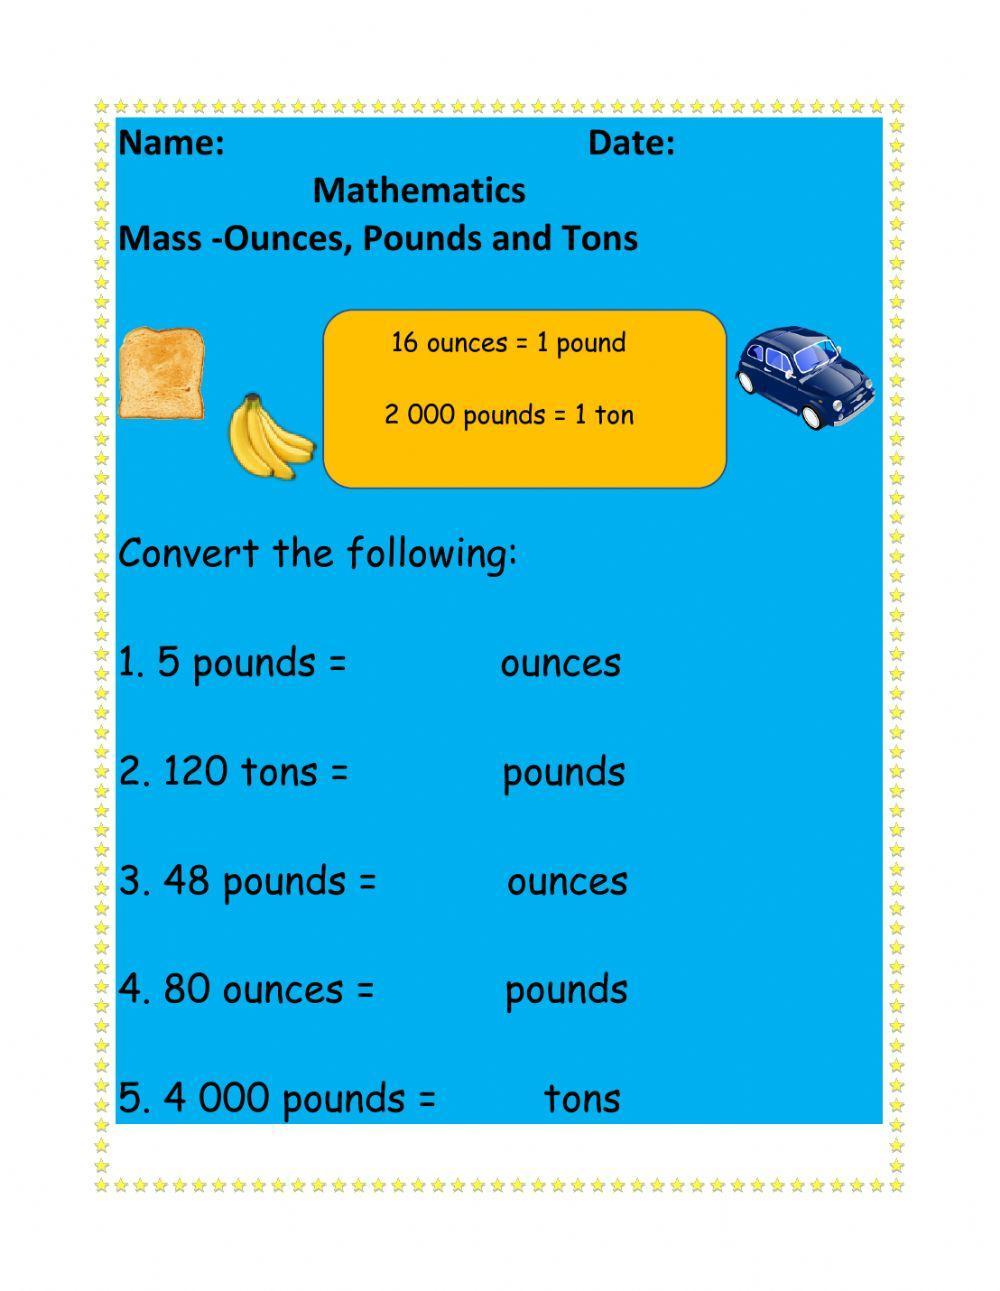 Mass - Ounces, Pounds and Tons worksheet | Live Worksheets